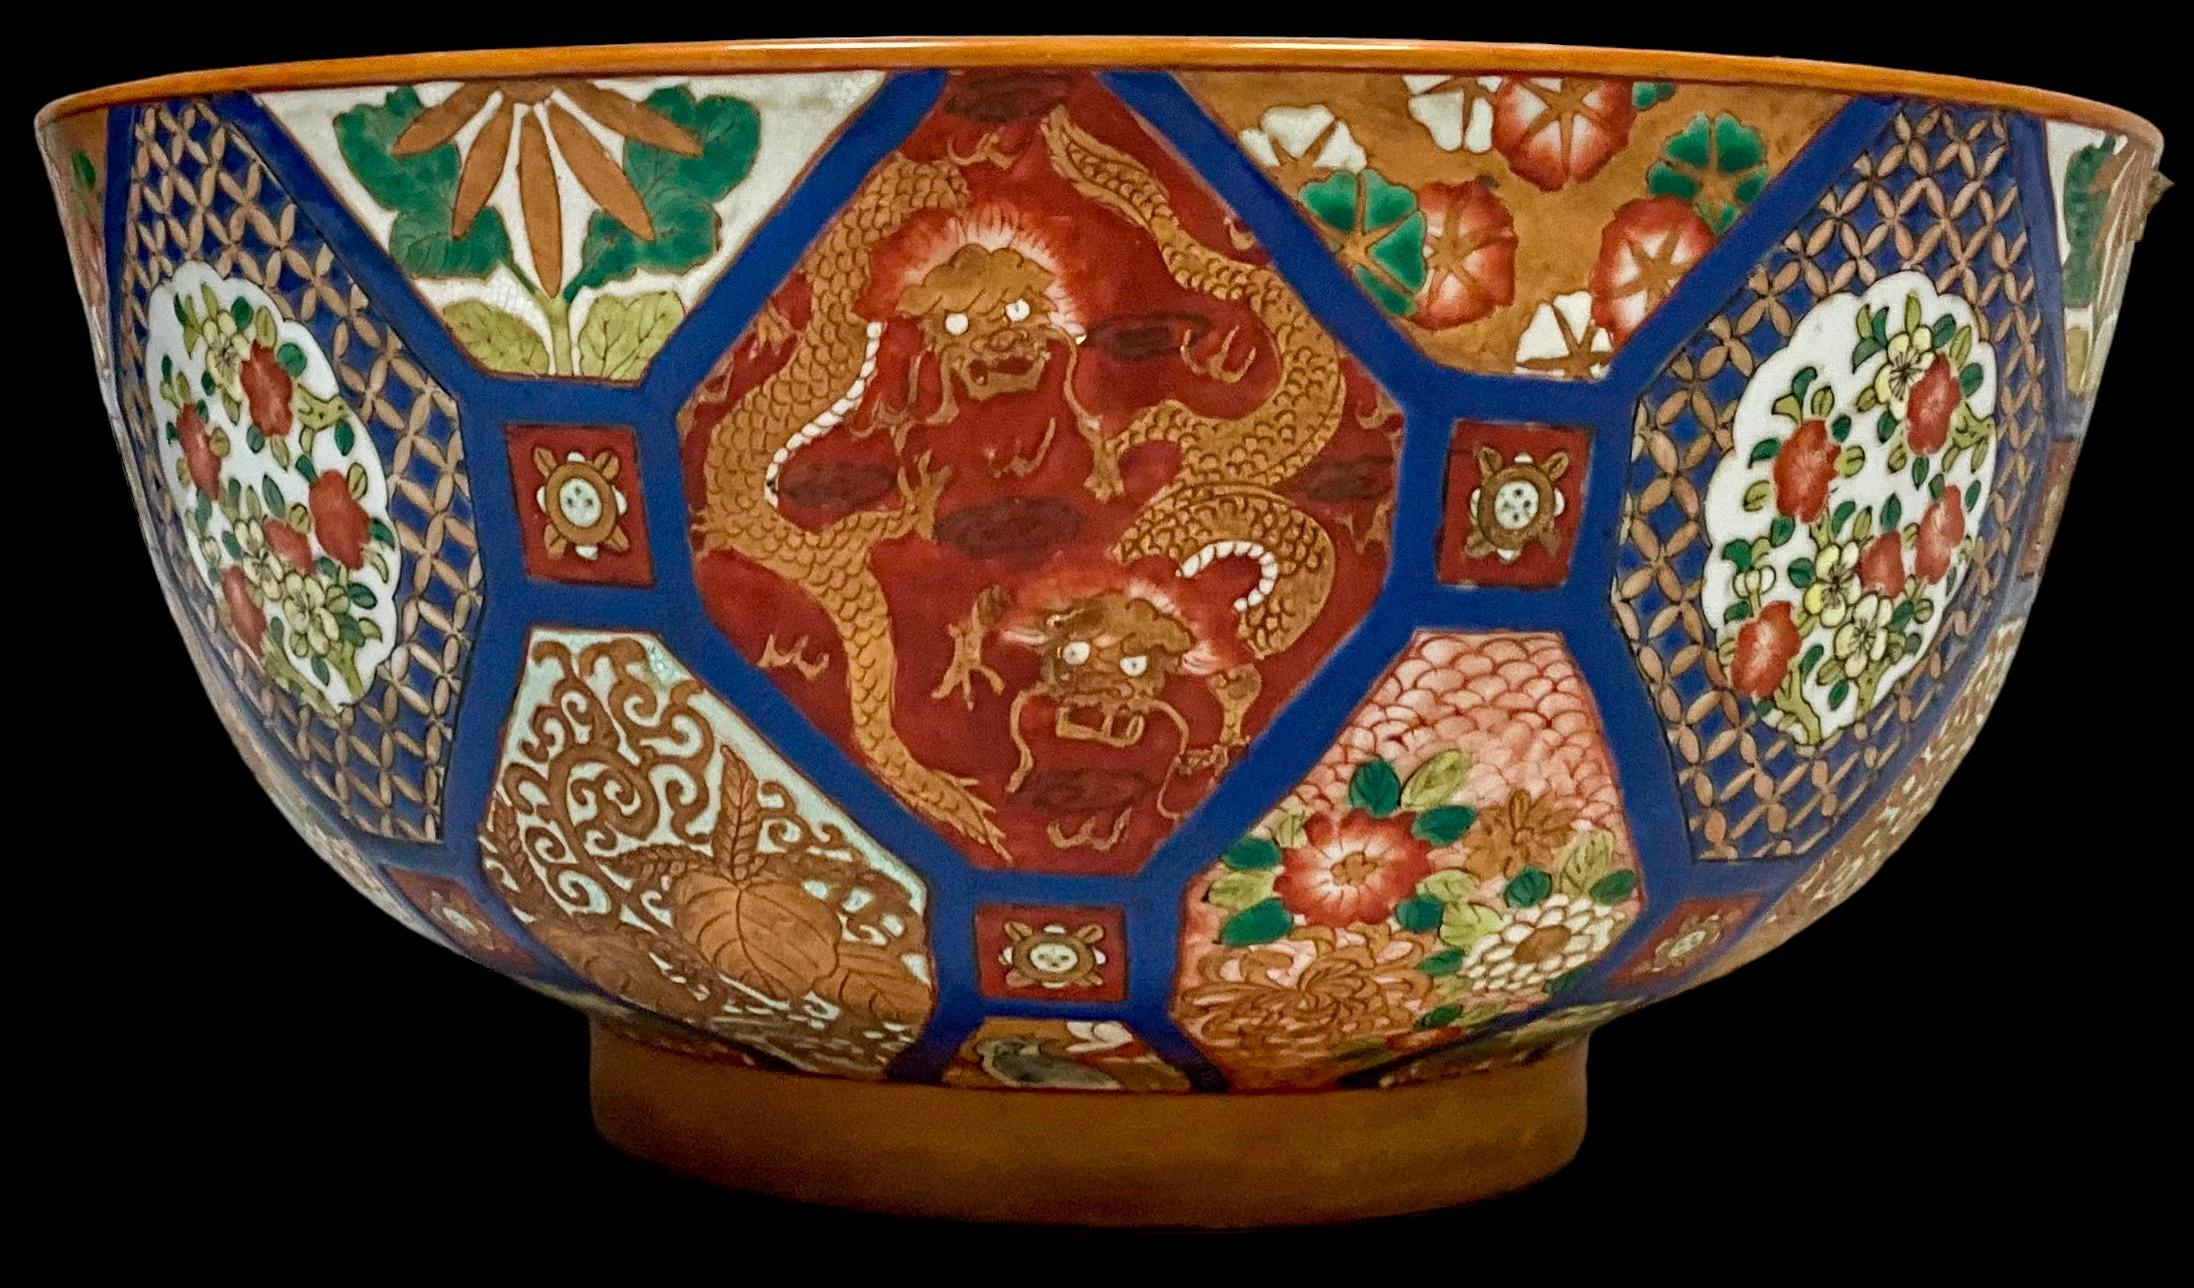 This is a late 20th century large scale Chinese Export style bowl. It has vivid blues and oranges with a dragon motif. It is marked and in very good condition.